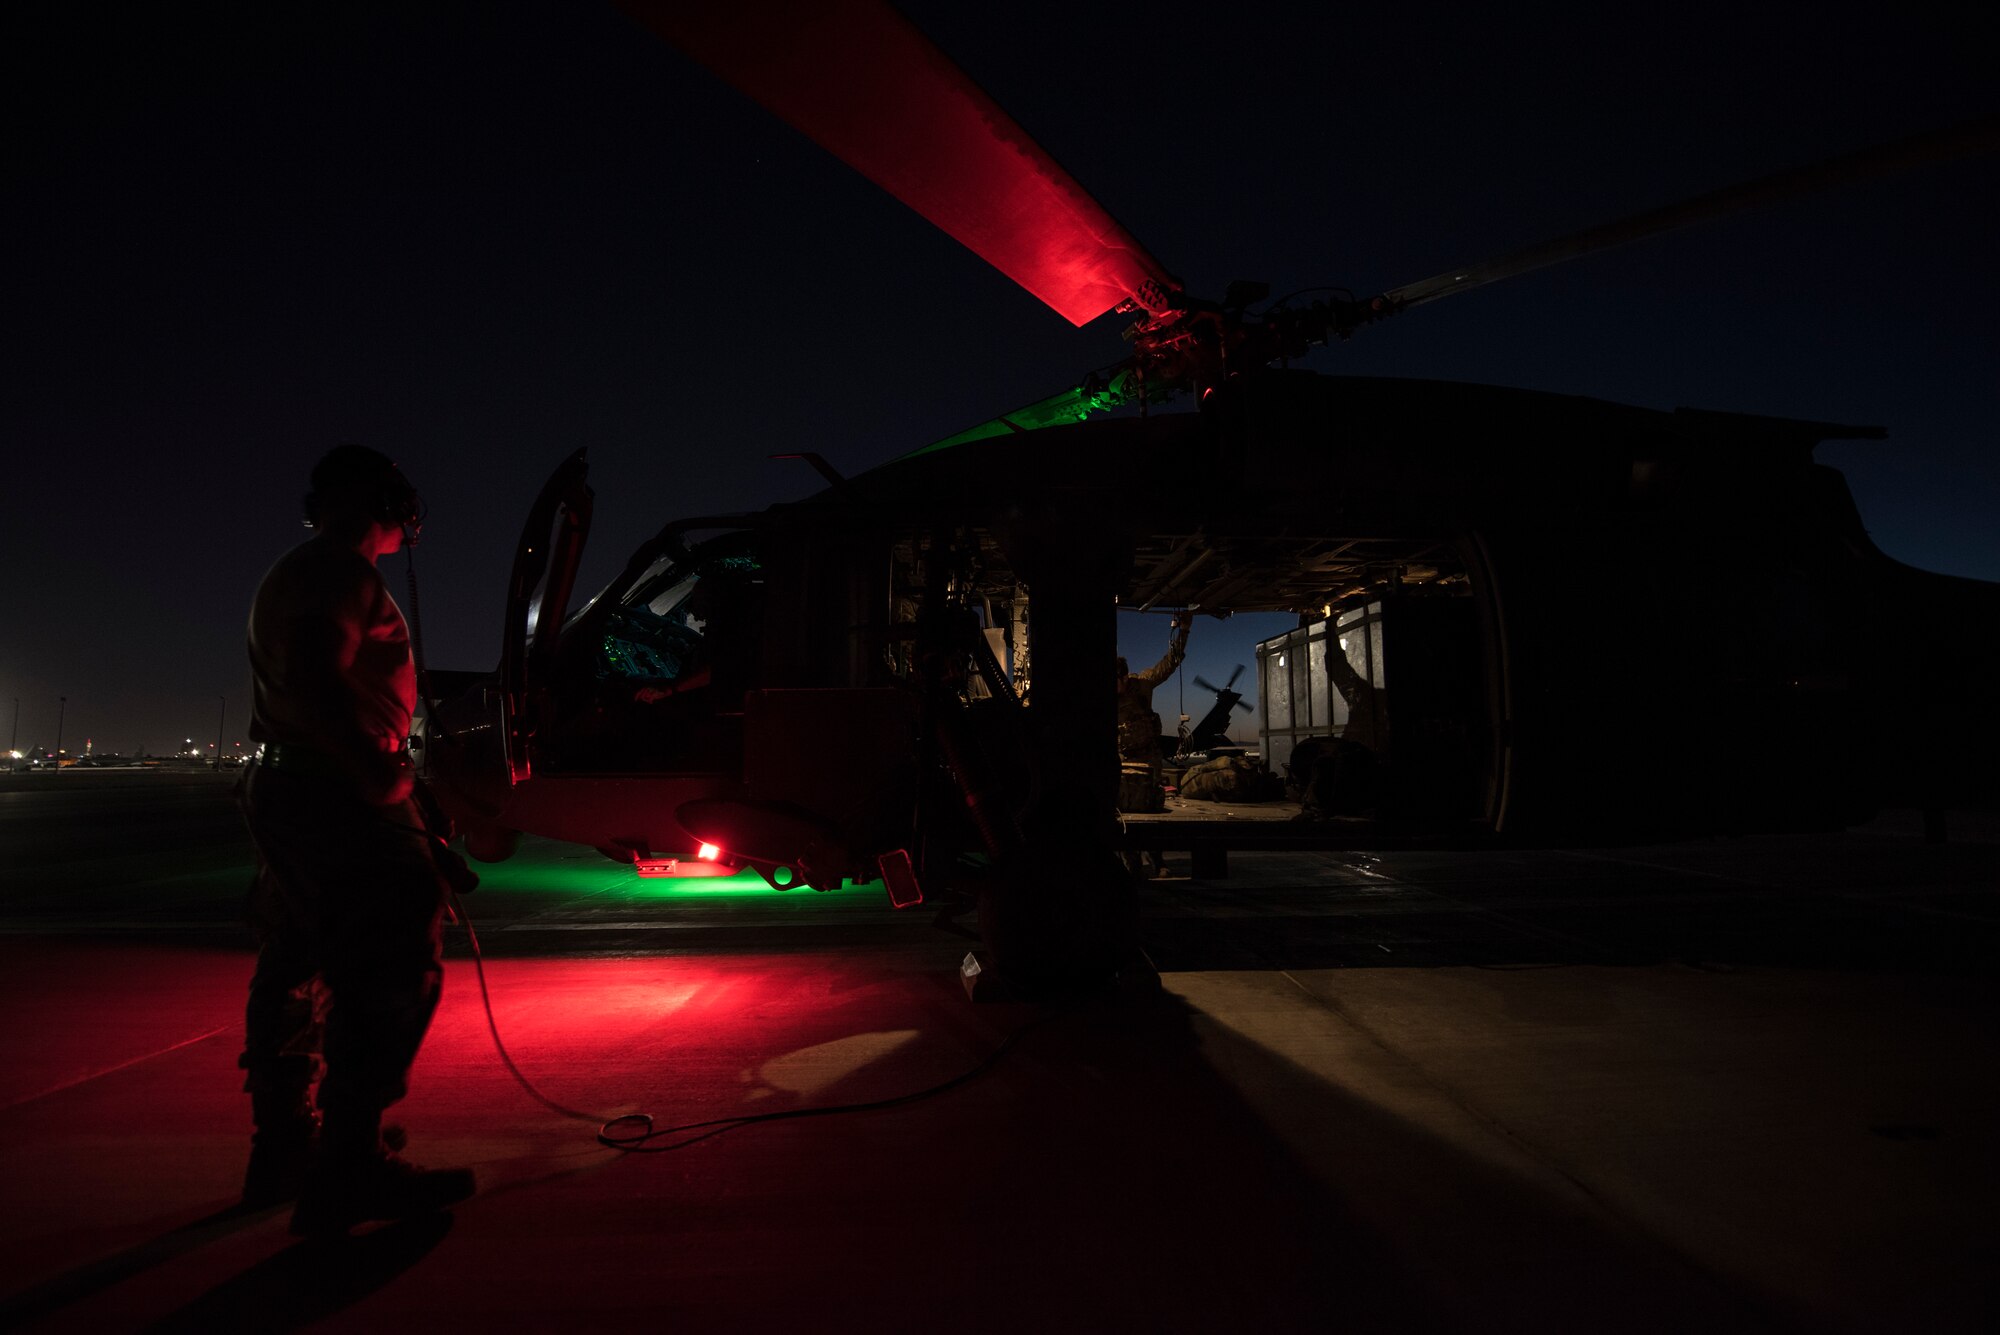 A crew prepares an HH-60G Pave Hawk helicopter prior to a large-scale U.S. Air Force Weapons School Integration Phase training exercise June 11, 2018 at Nellis Air Force Base, Nev. The scenario tested the Pave Hawk crew’s ability to work as part of a joint force in order to safely locate, recover, and treat a downed pilot in a contested environment. (U.S. Air Force photo by Staff Sgt. Joshua Kleinholz)